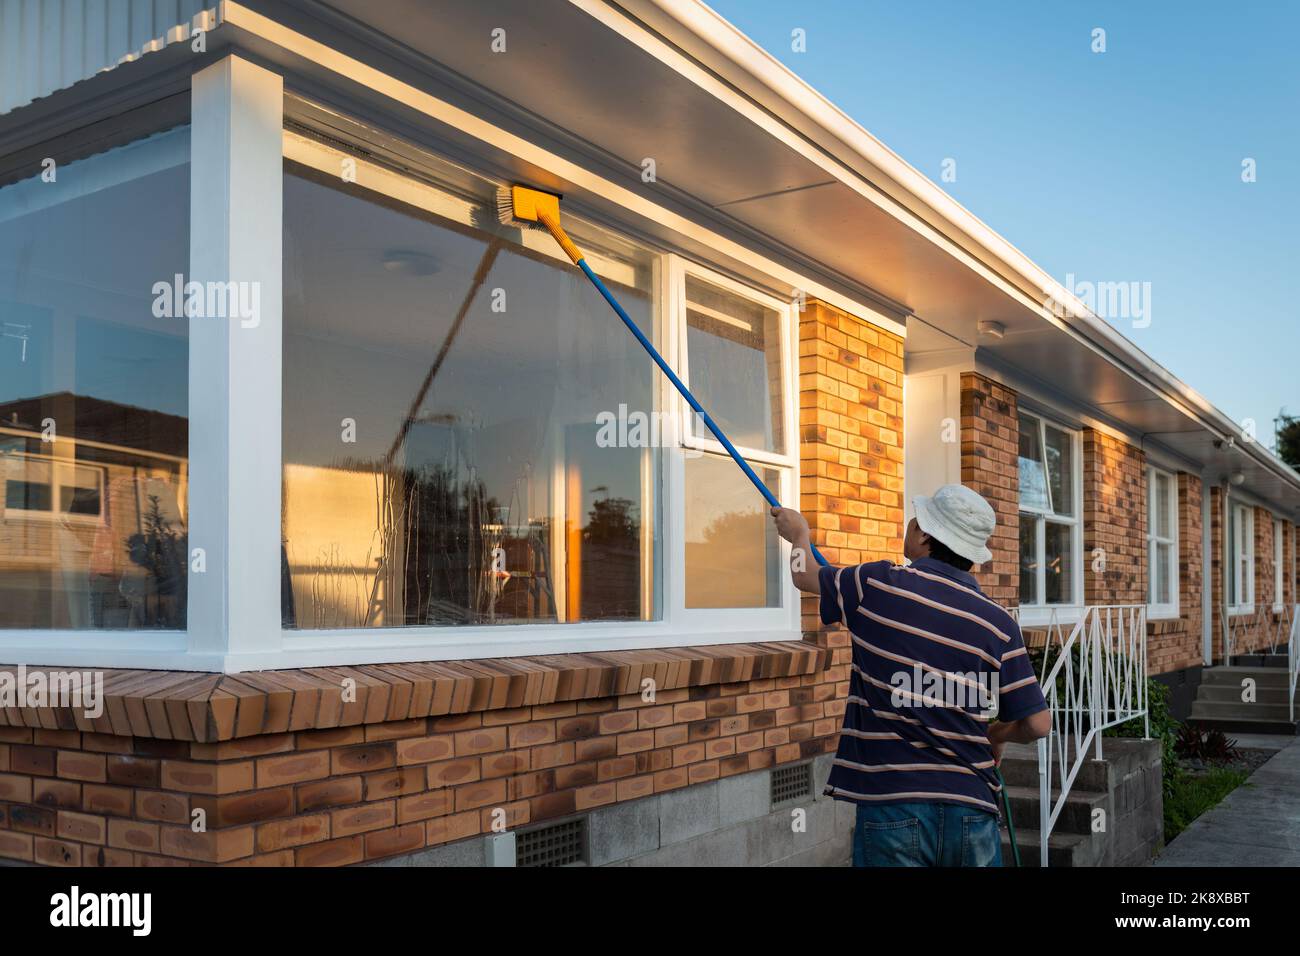 Man washing windows of an empty house with long pole and brush. Home refurbishment project in Auckland. Stock Photo